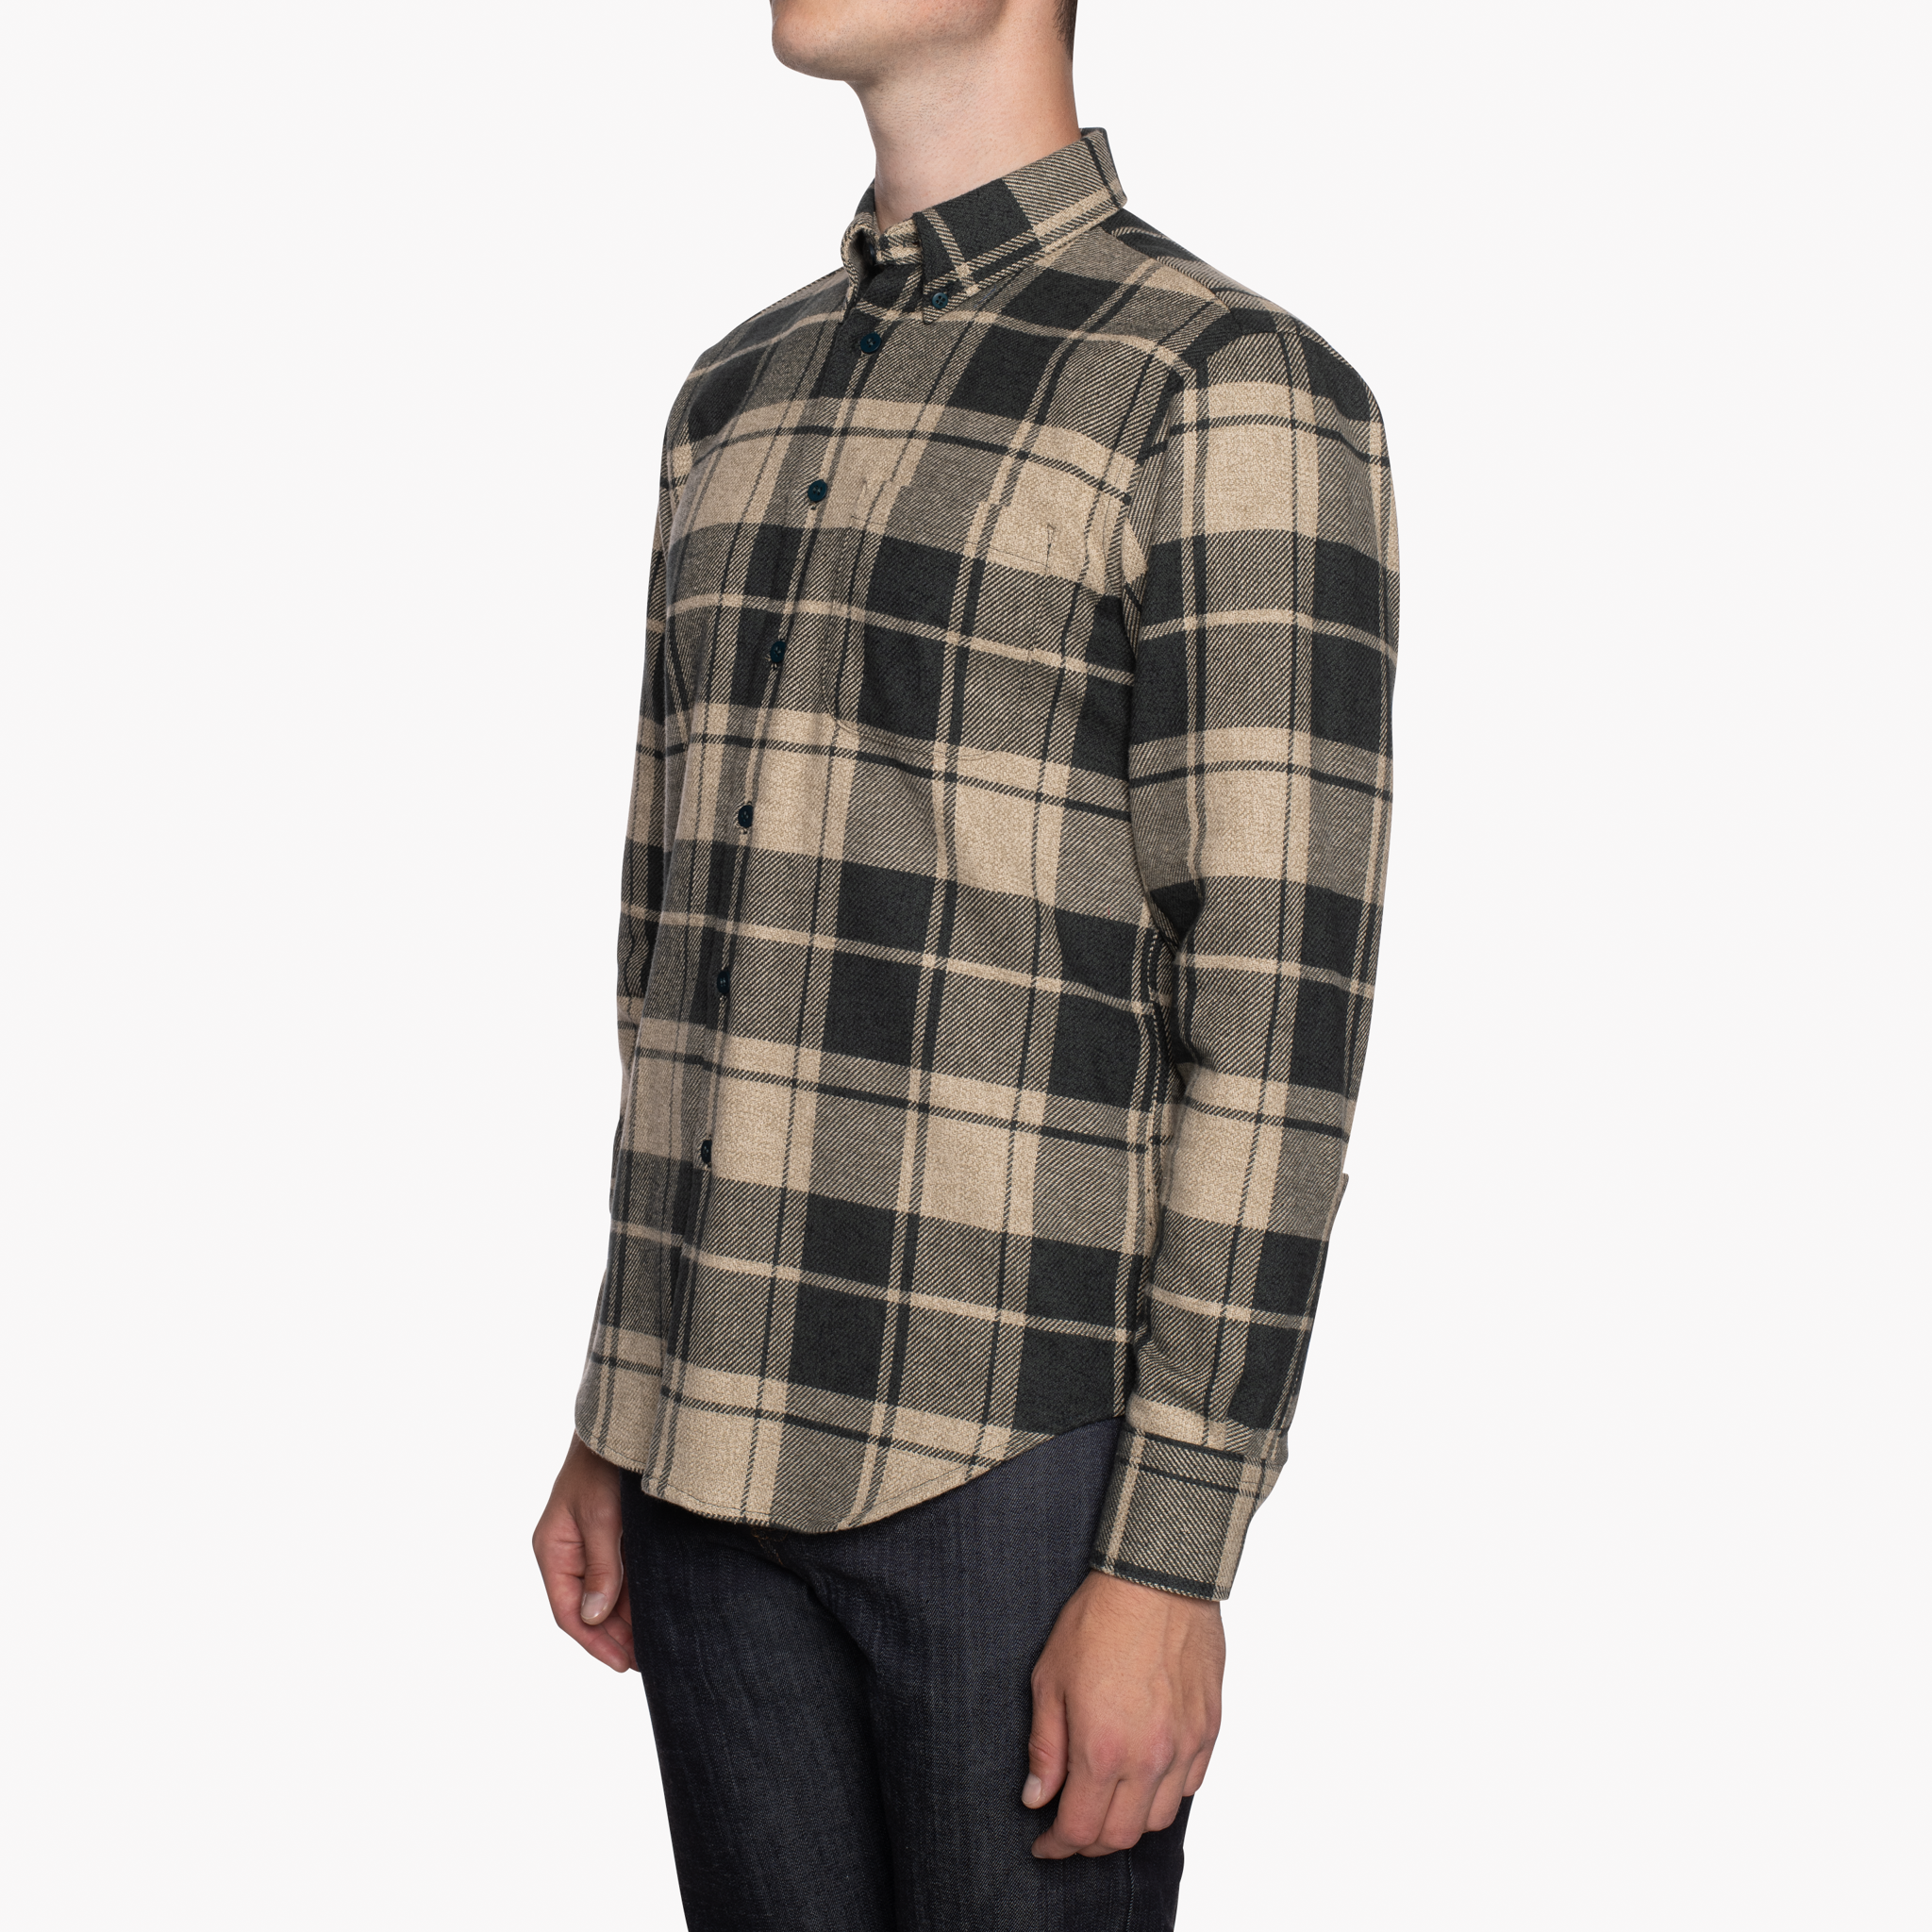  Easy Shirt - Heavy Vintage Flannel - Forest/Grey - side 